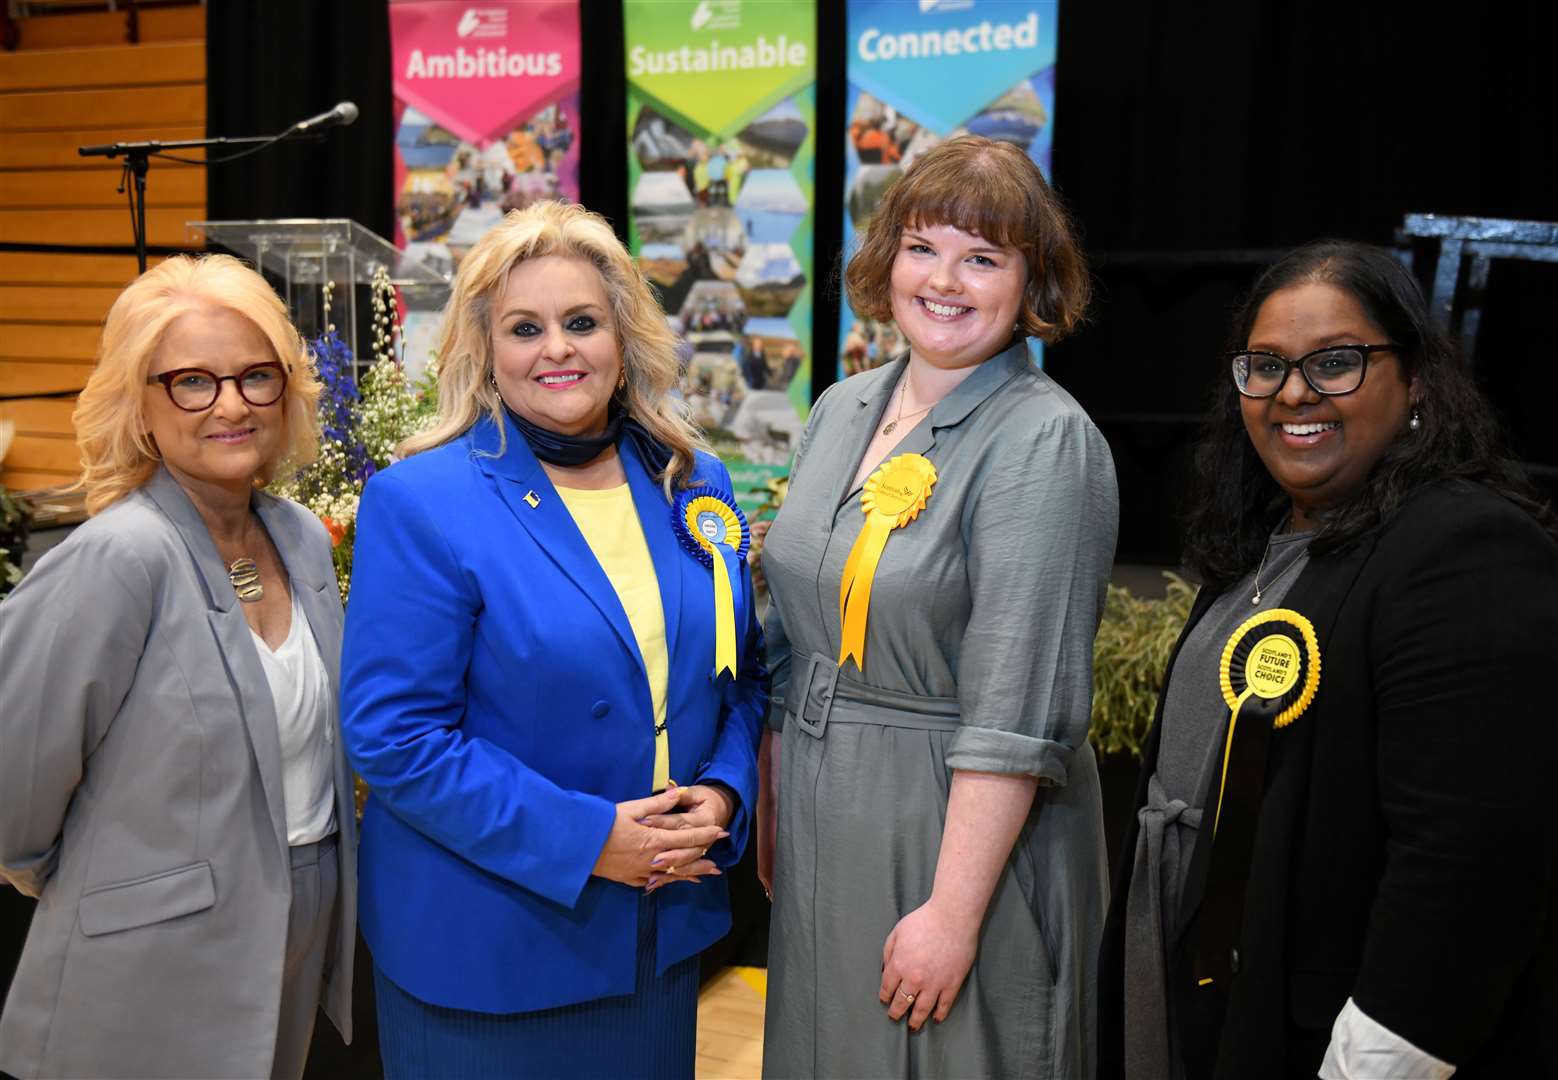 Councillors by Ward: 06 Cromarty Firth: Pauline Munro (Independent), Maxine Morely-Smith (Independent), Molly Nolan (Scottish Liberal Democrats) and Tamala Collier (Scottish National Party). Picture: James Mackenzie